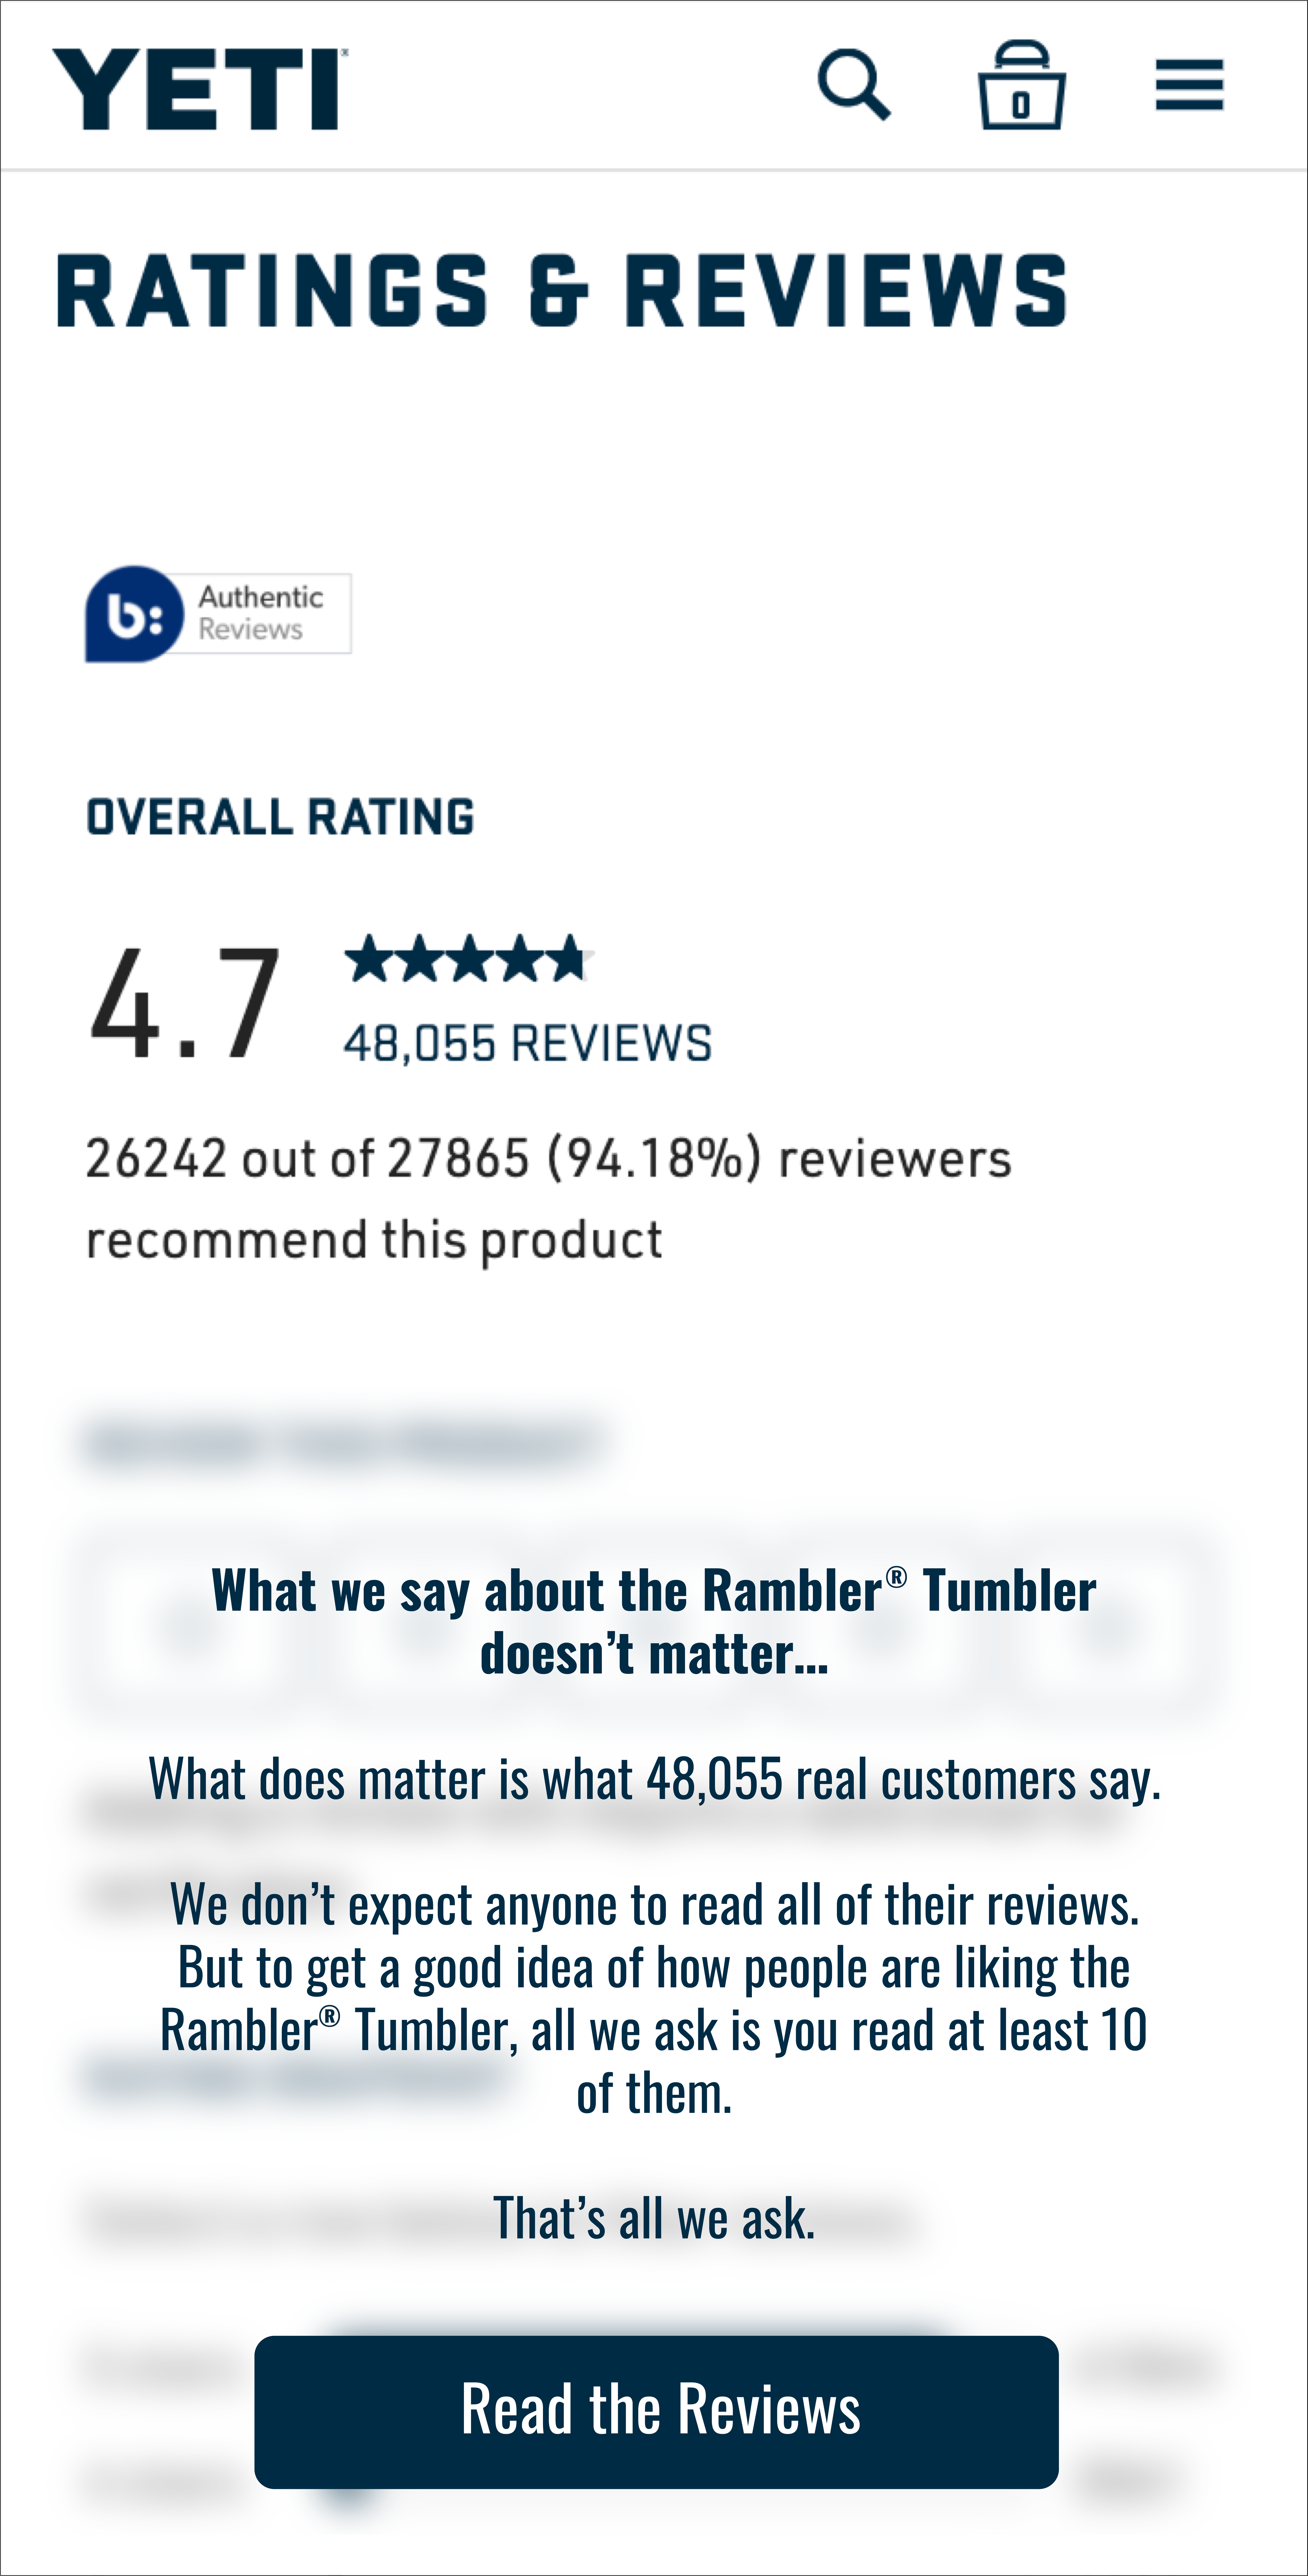 The blurred overlay we'd add to the reviews section.